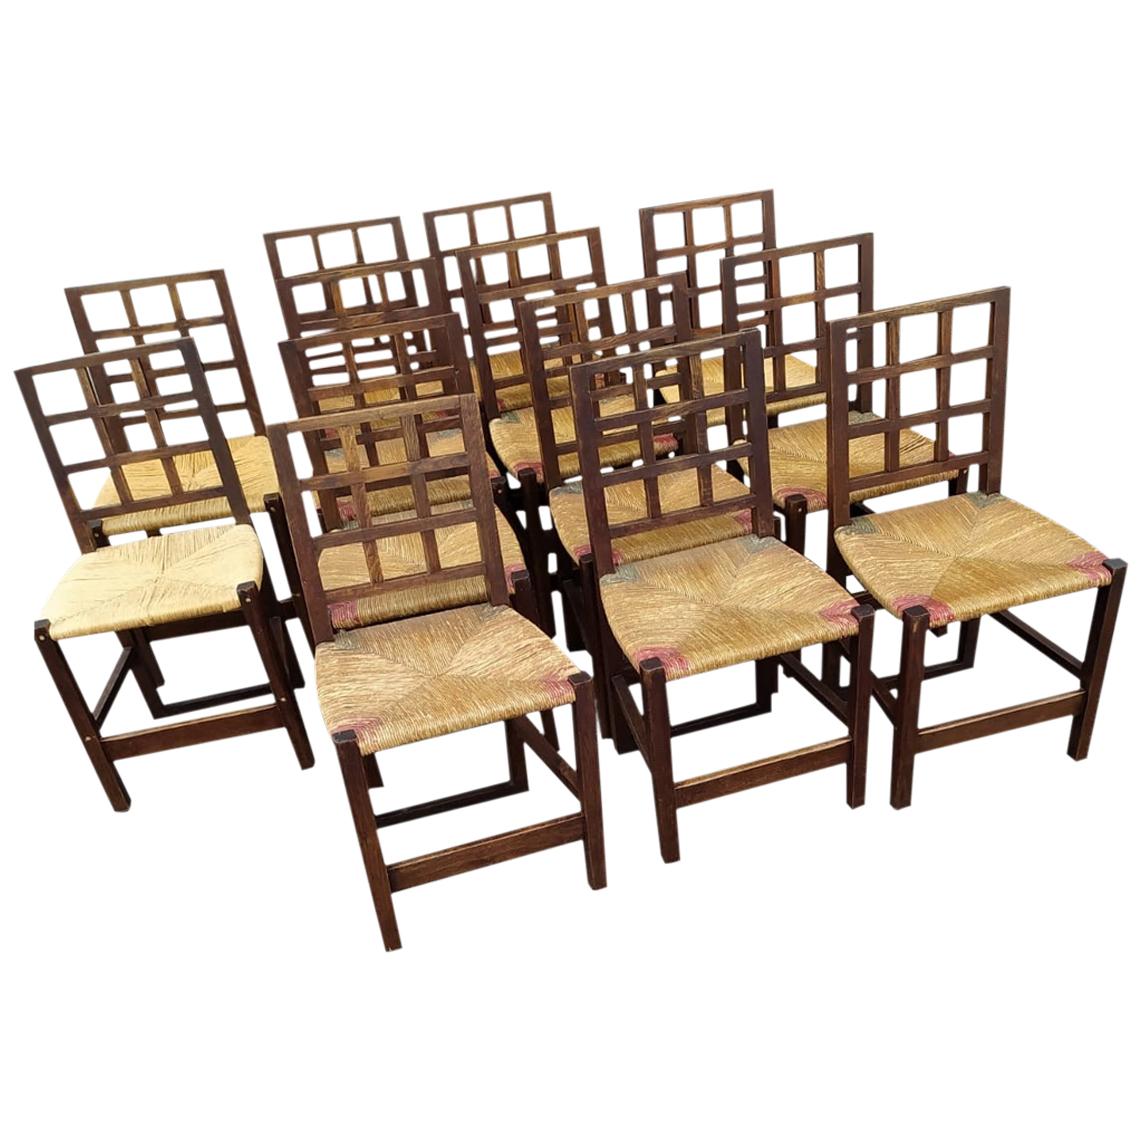 Victor Courtray Set of 12 Chairs